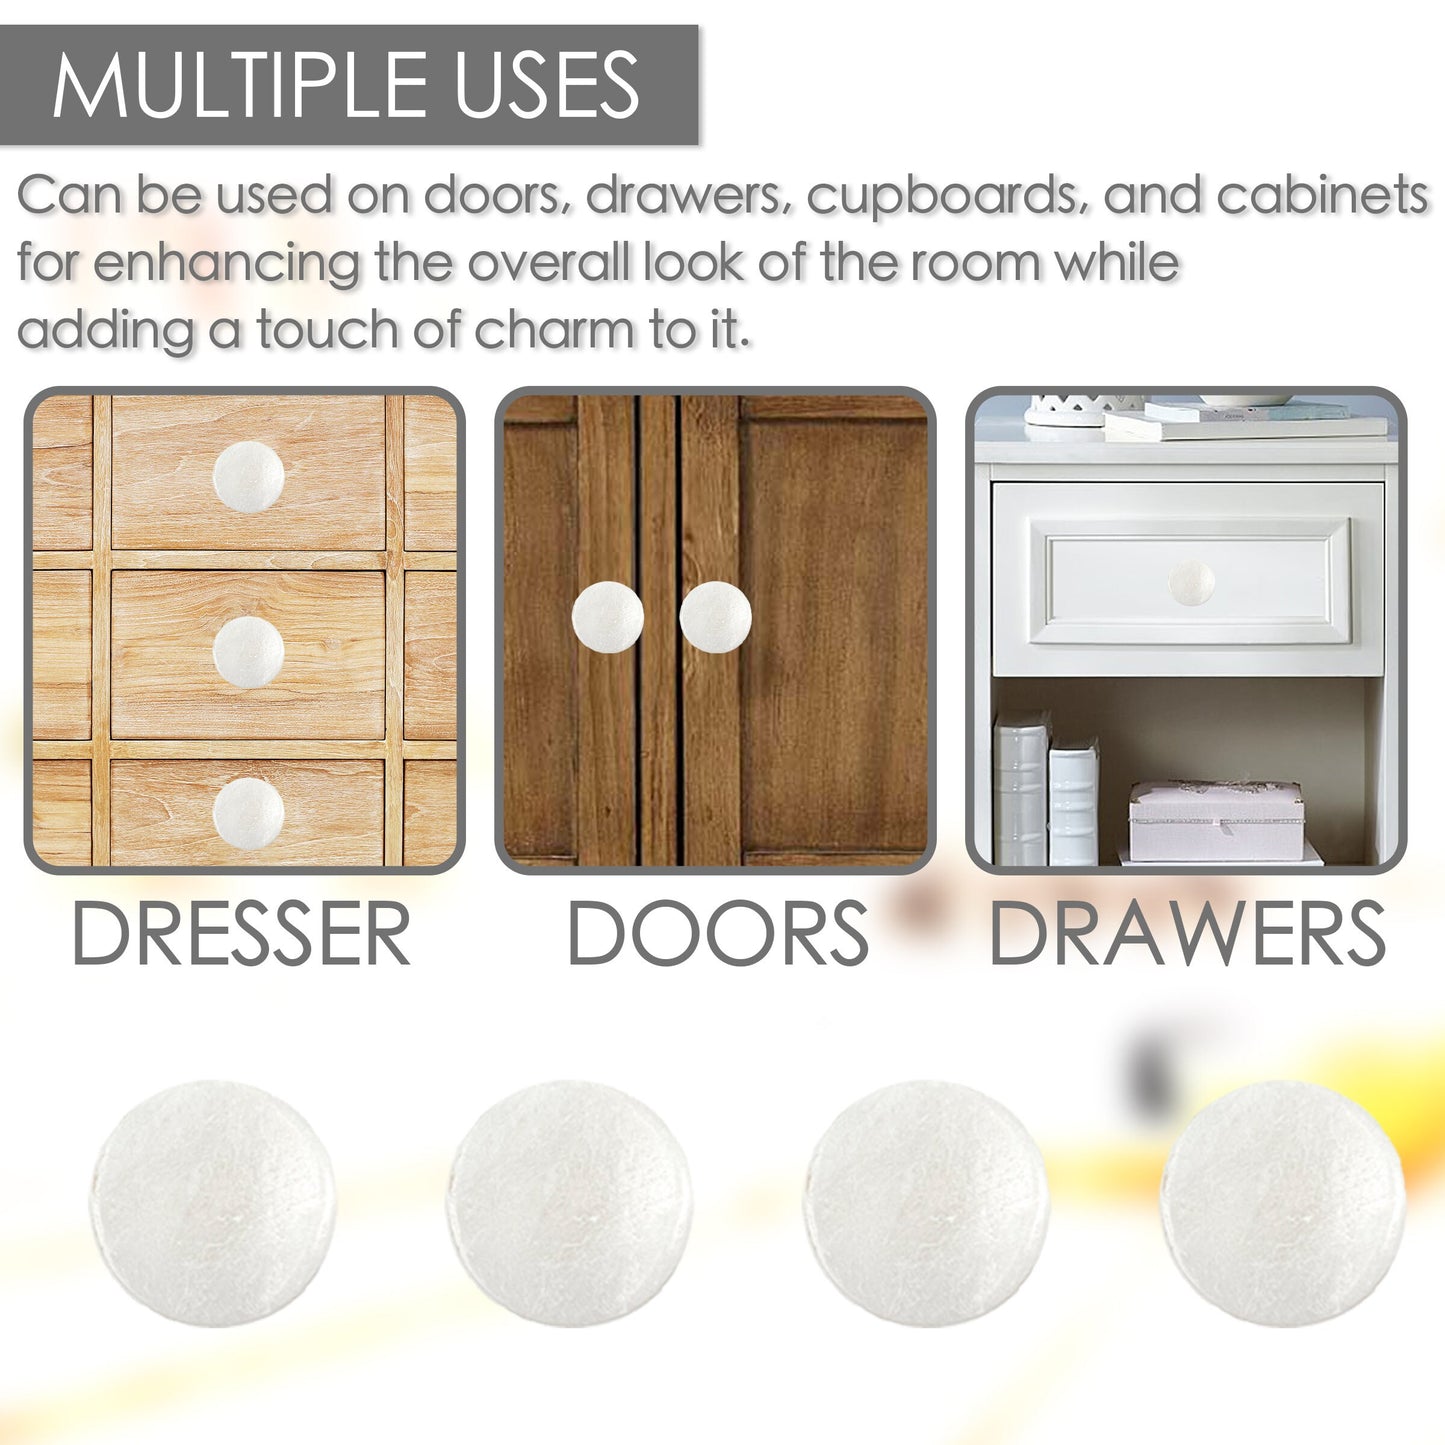 Stone Disk Knob Cabinet Knobs 6 Pack Knobs for Cabinets and Drawers, Closet Door Knobs, Drawer Pulls and Knobs with Mounting Screws (White)